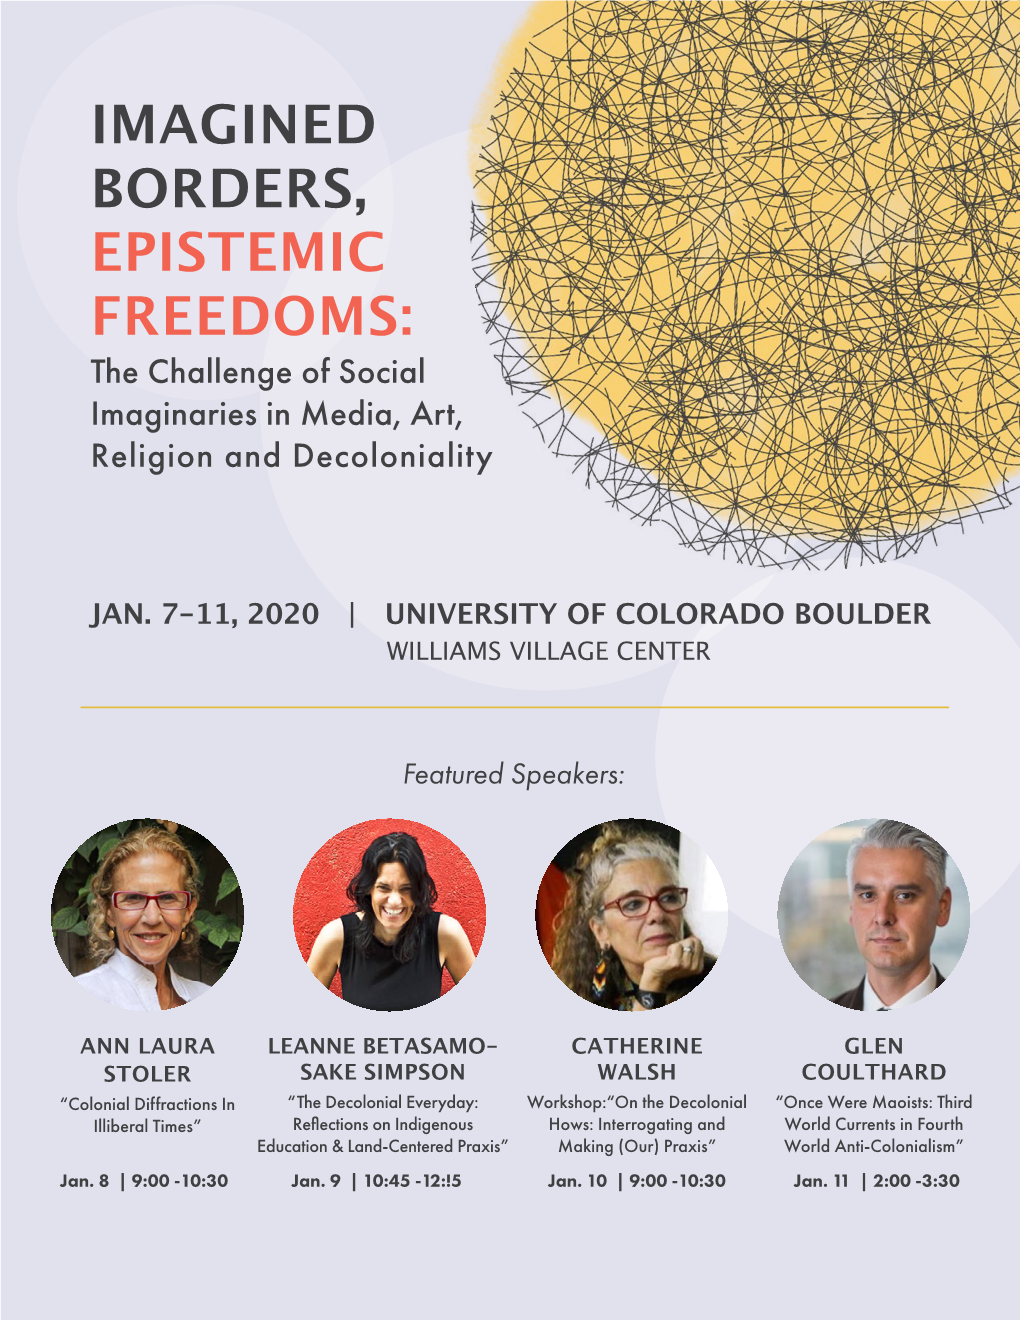 IMAGINED BORDERS, EPISTEMIC FREEDOMS: the Challenge of Social Imaginaries in Media, Art, Religion and Decoloniality